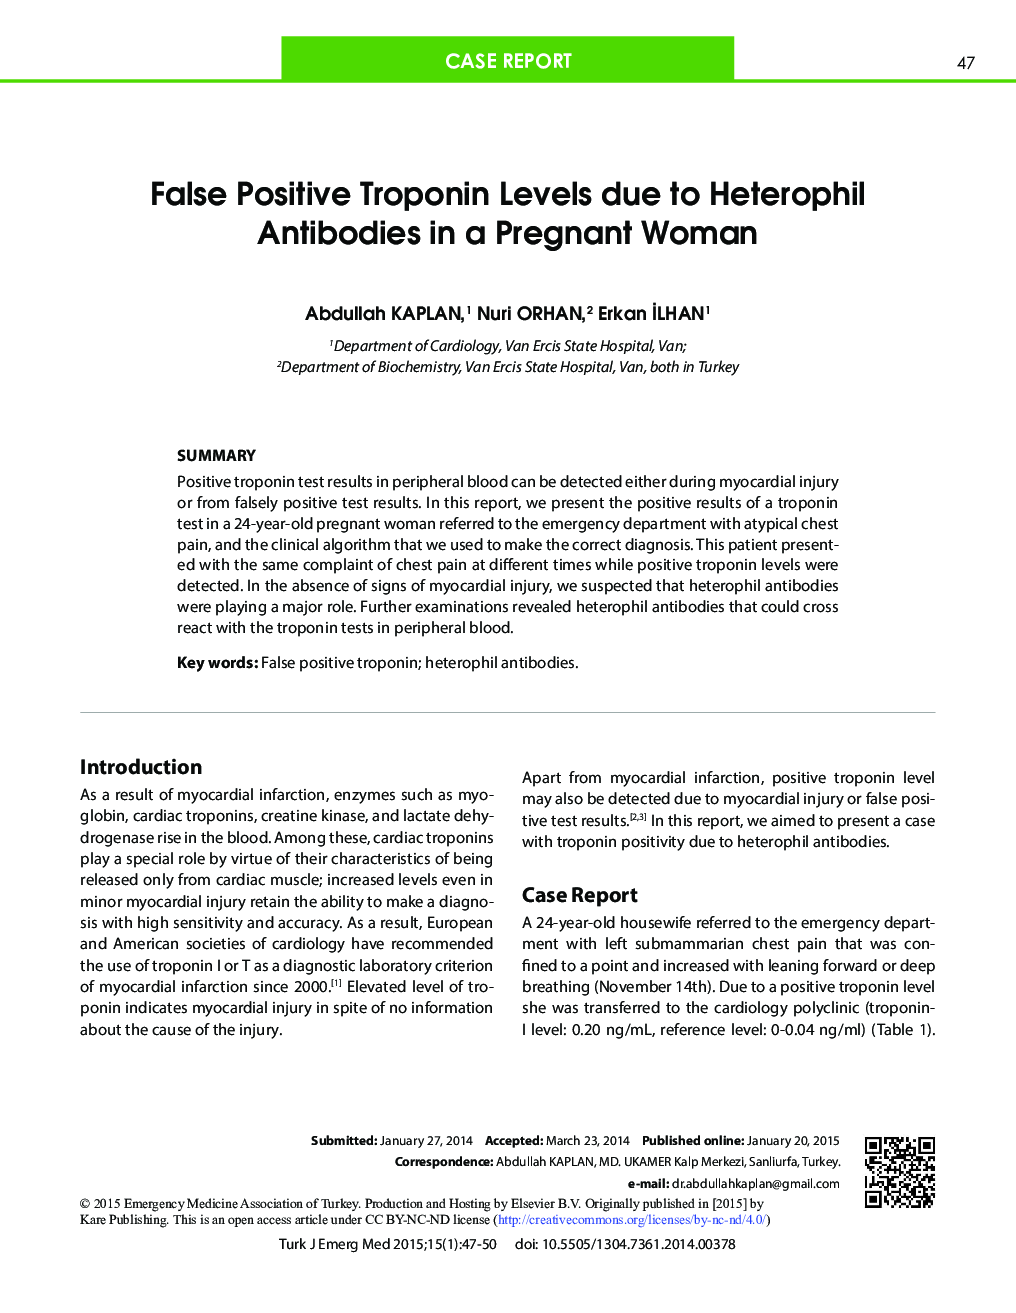 False Positive Troponin Levels due to Heterophil Antibodies in a Pregnant Woman 